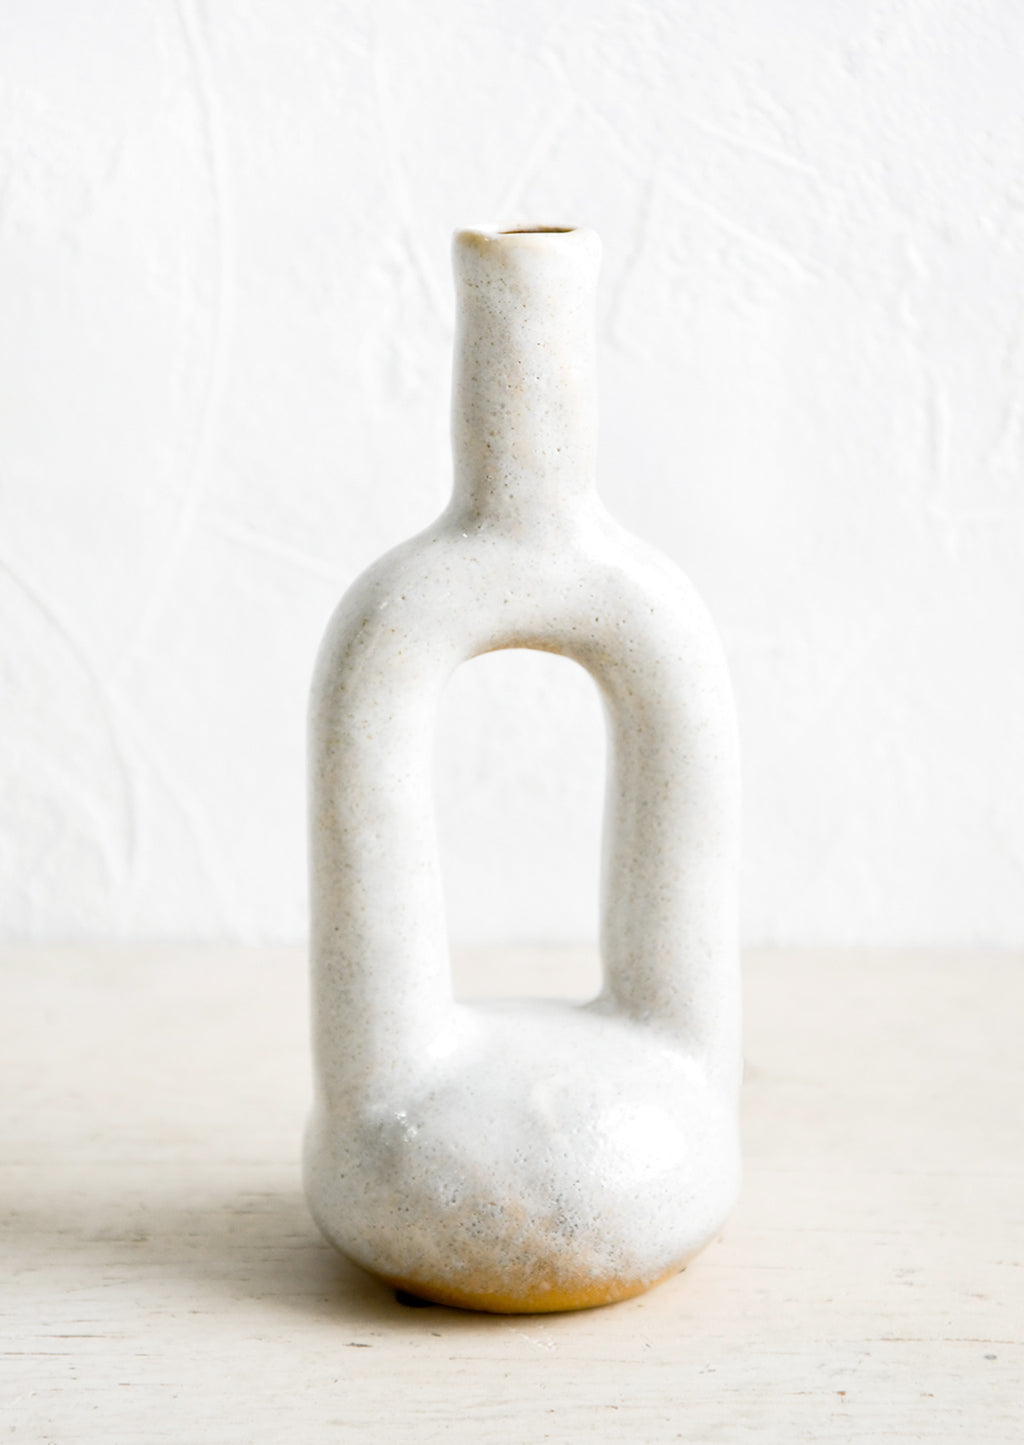 1: Ceramic bud vase in off-white glaze with hollow center